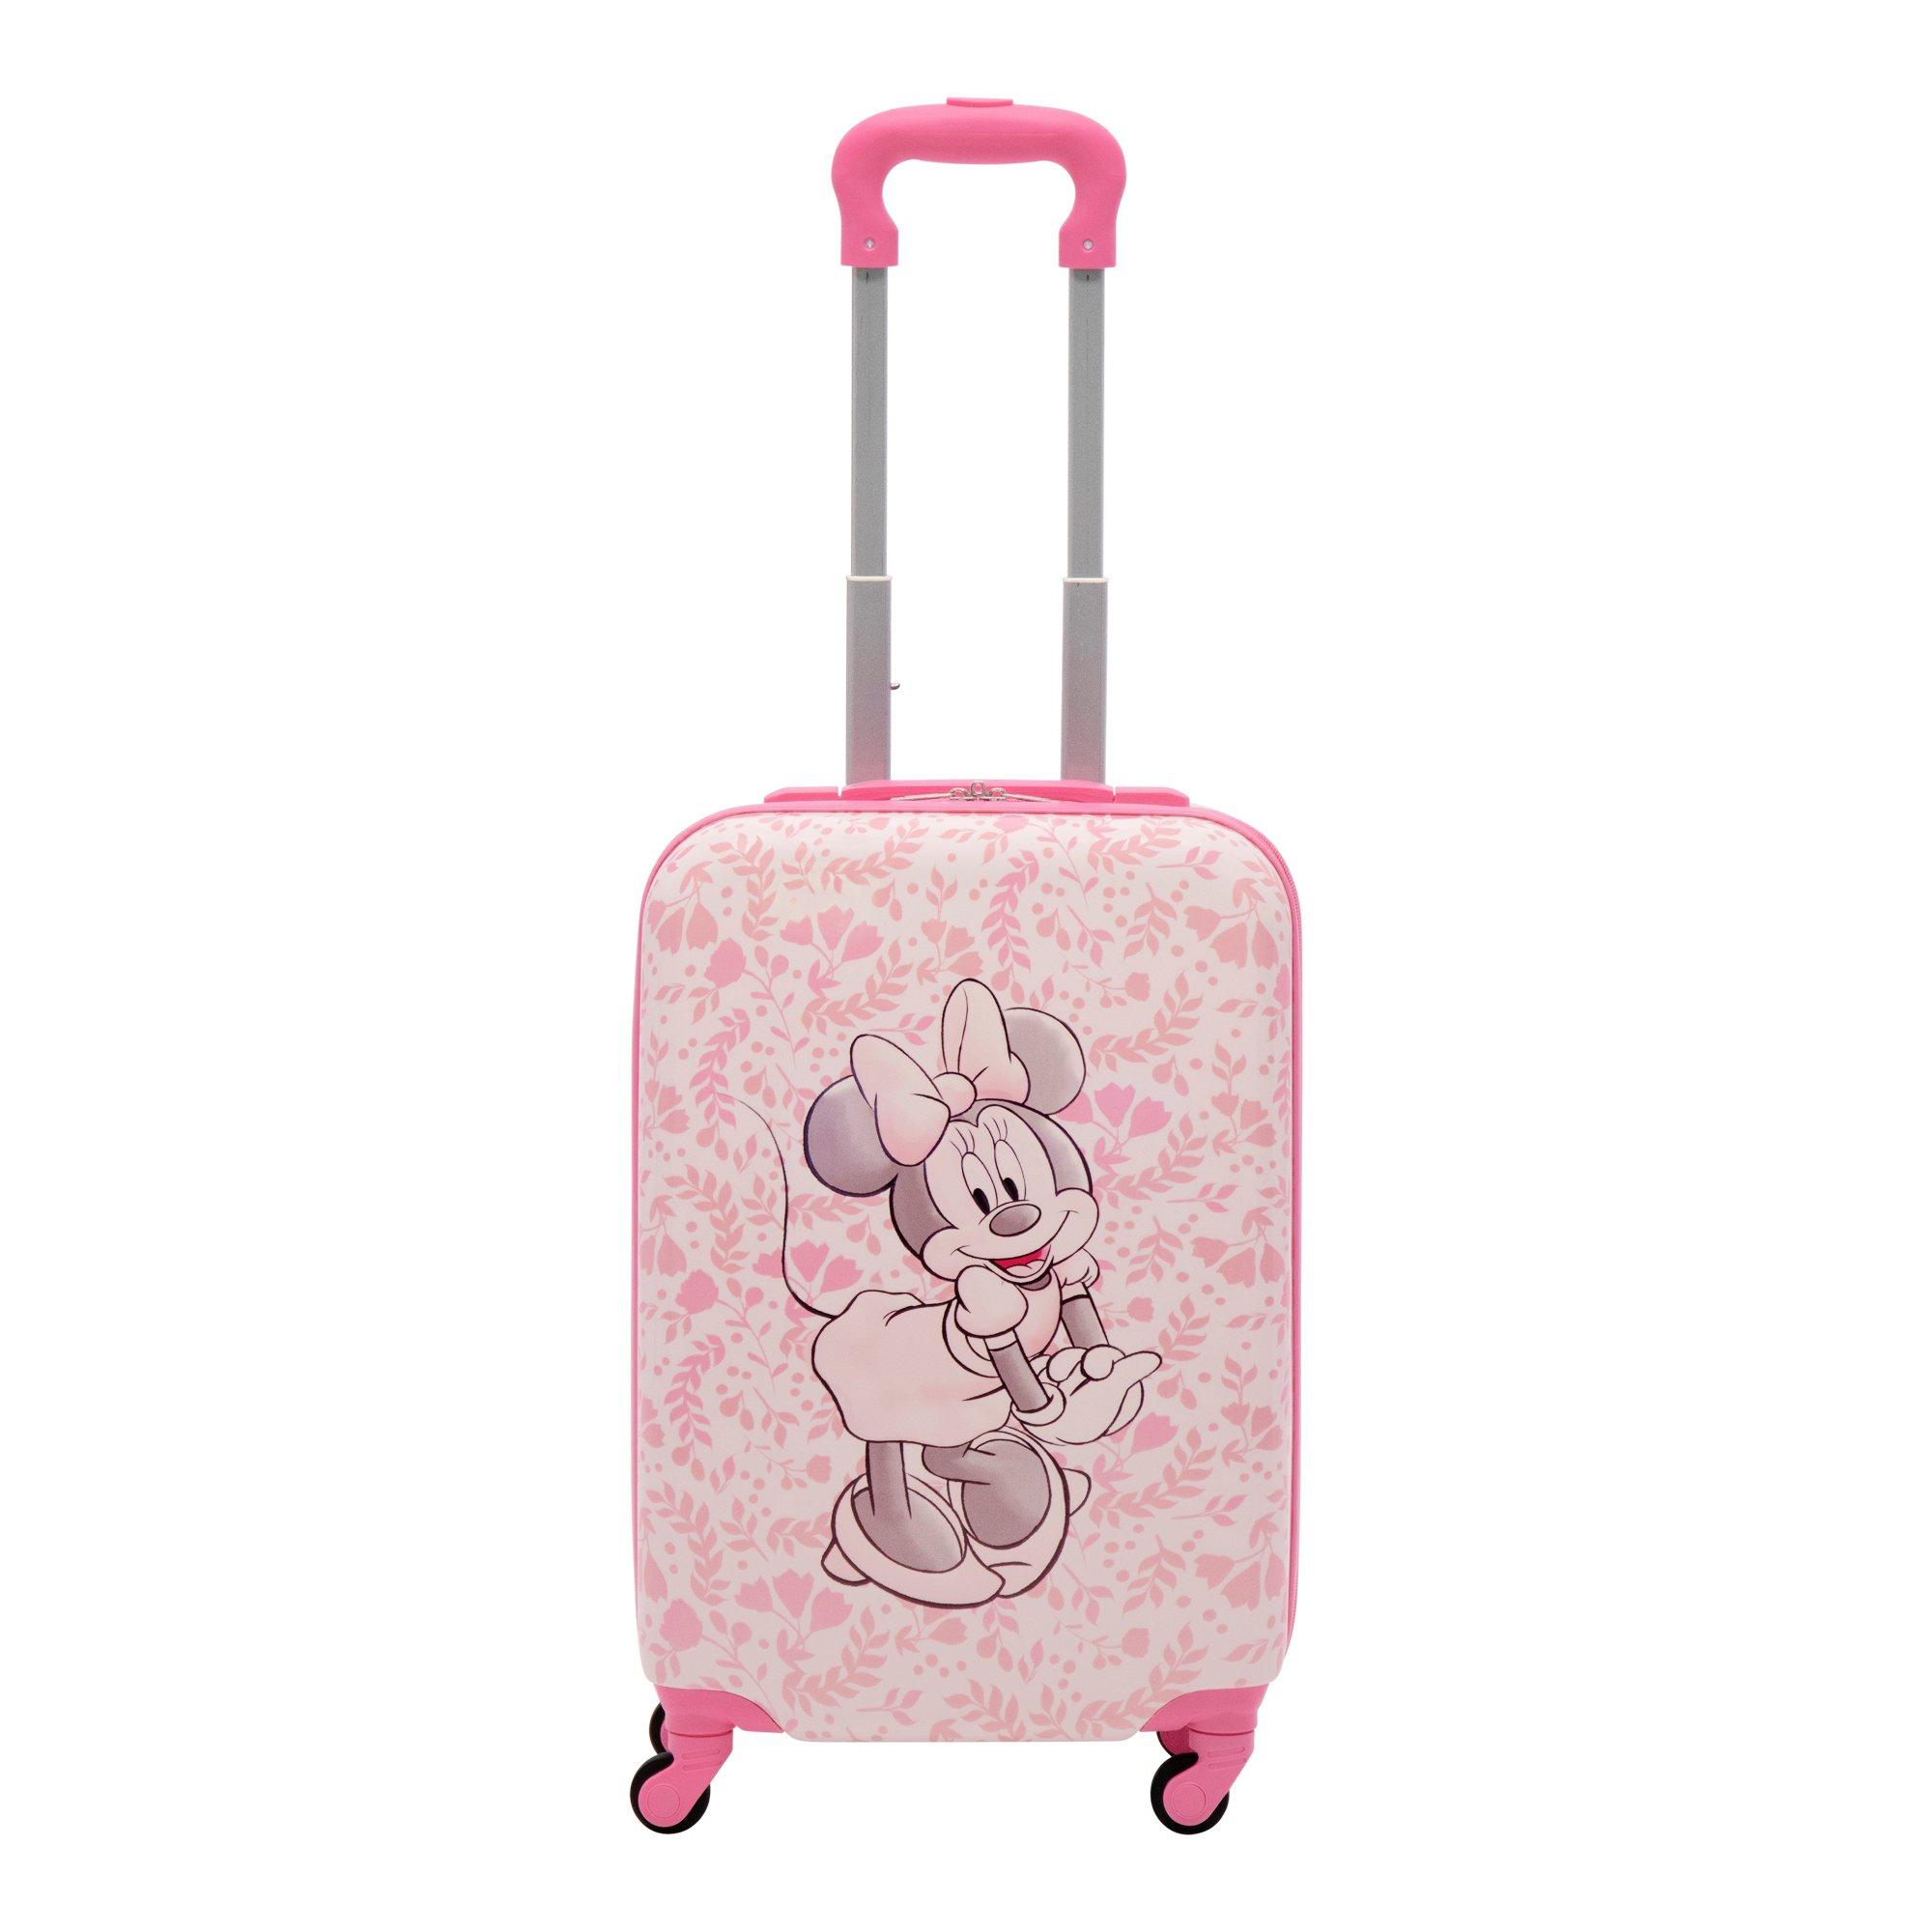 FUL Disney Minnie Mouse Pose with Floral Background Kids 21-in Hard-Sided Carry-On Luggage